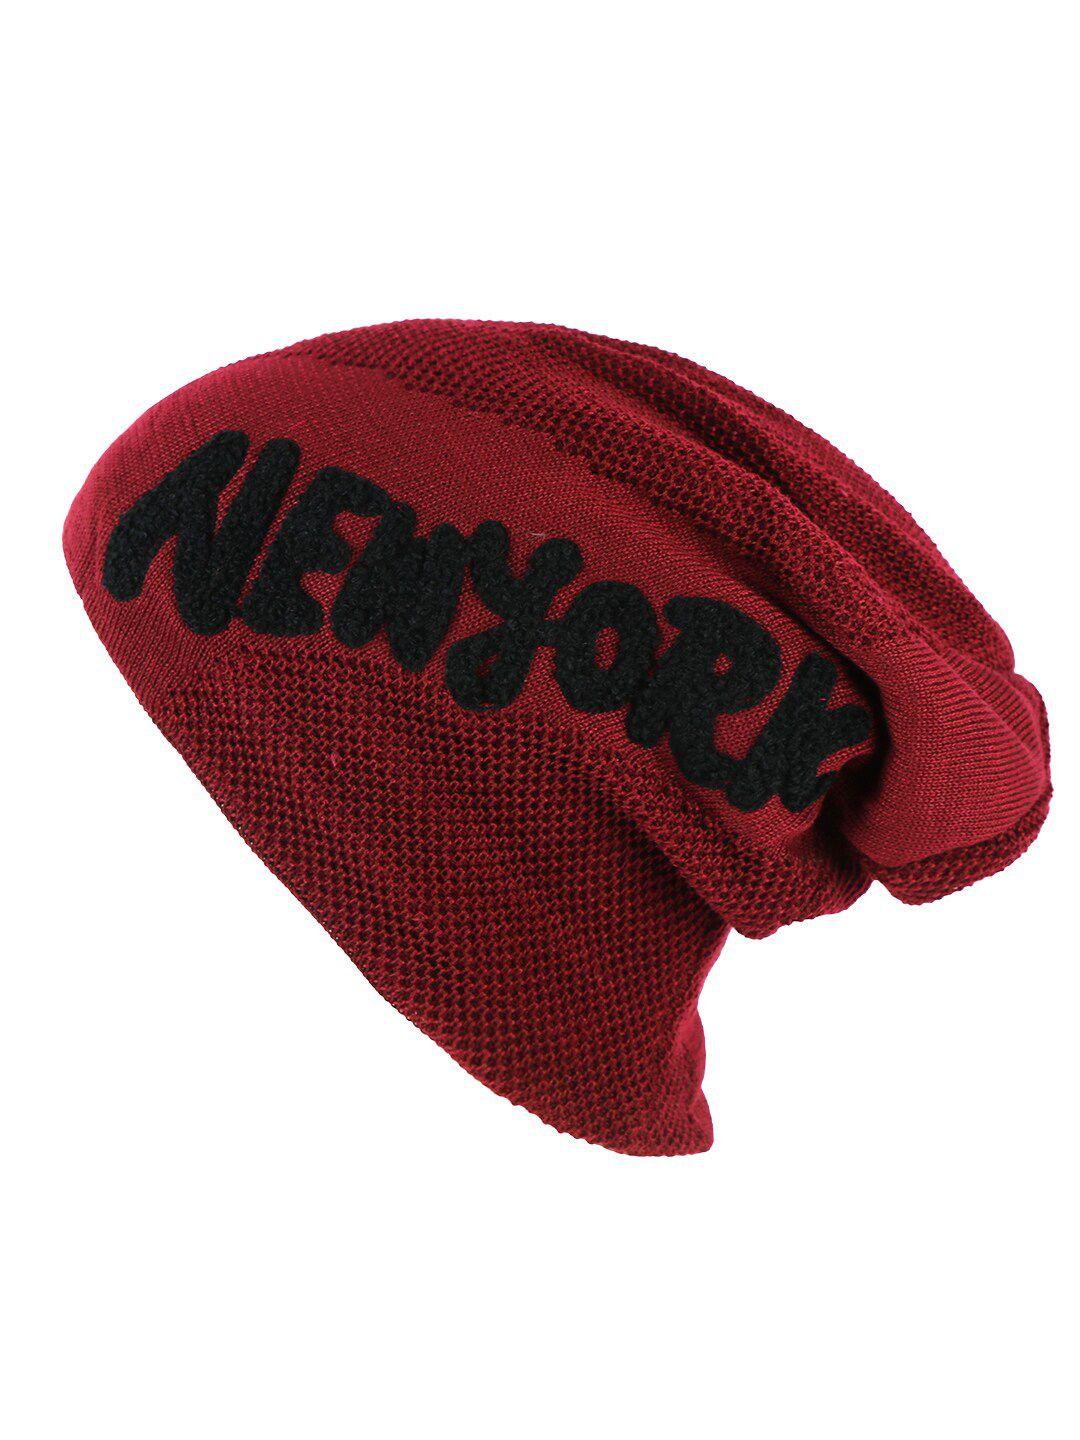 isweven unisex red & black beanie